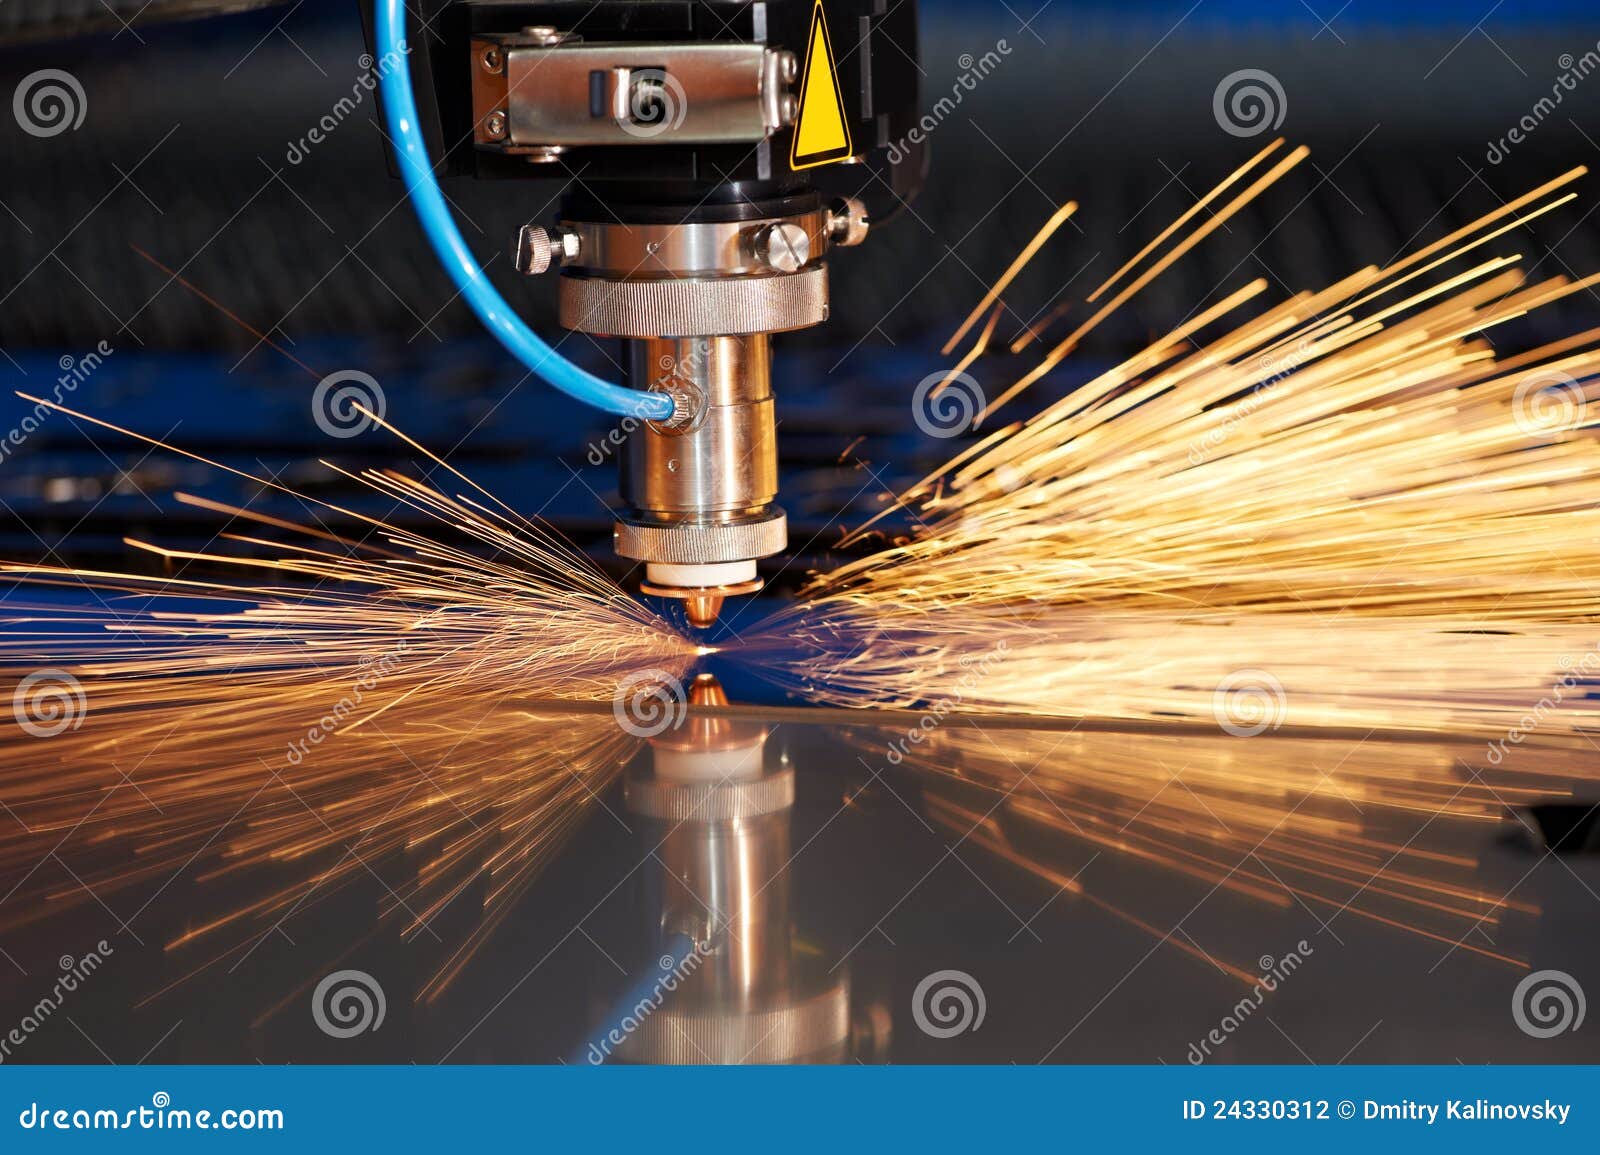 laser cutting of metal sheet with sparks